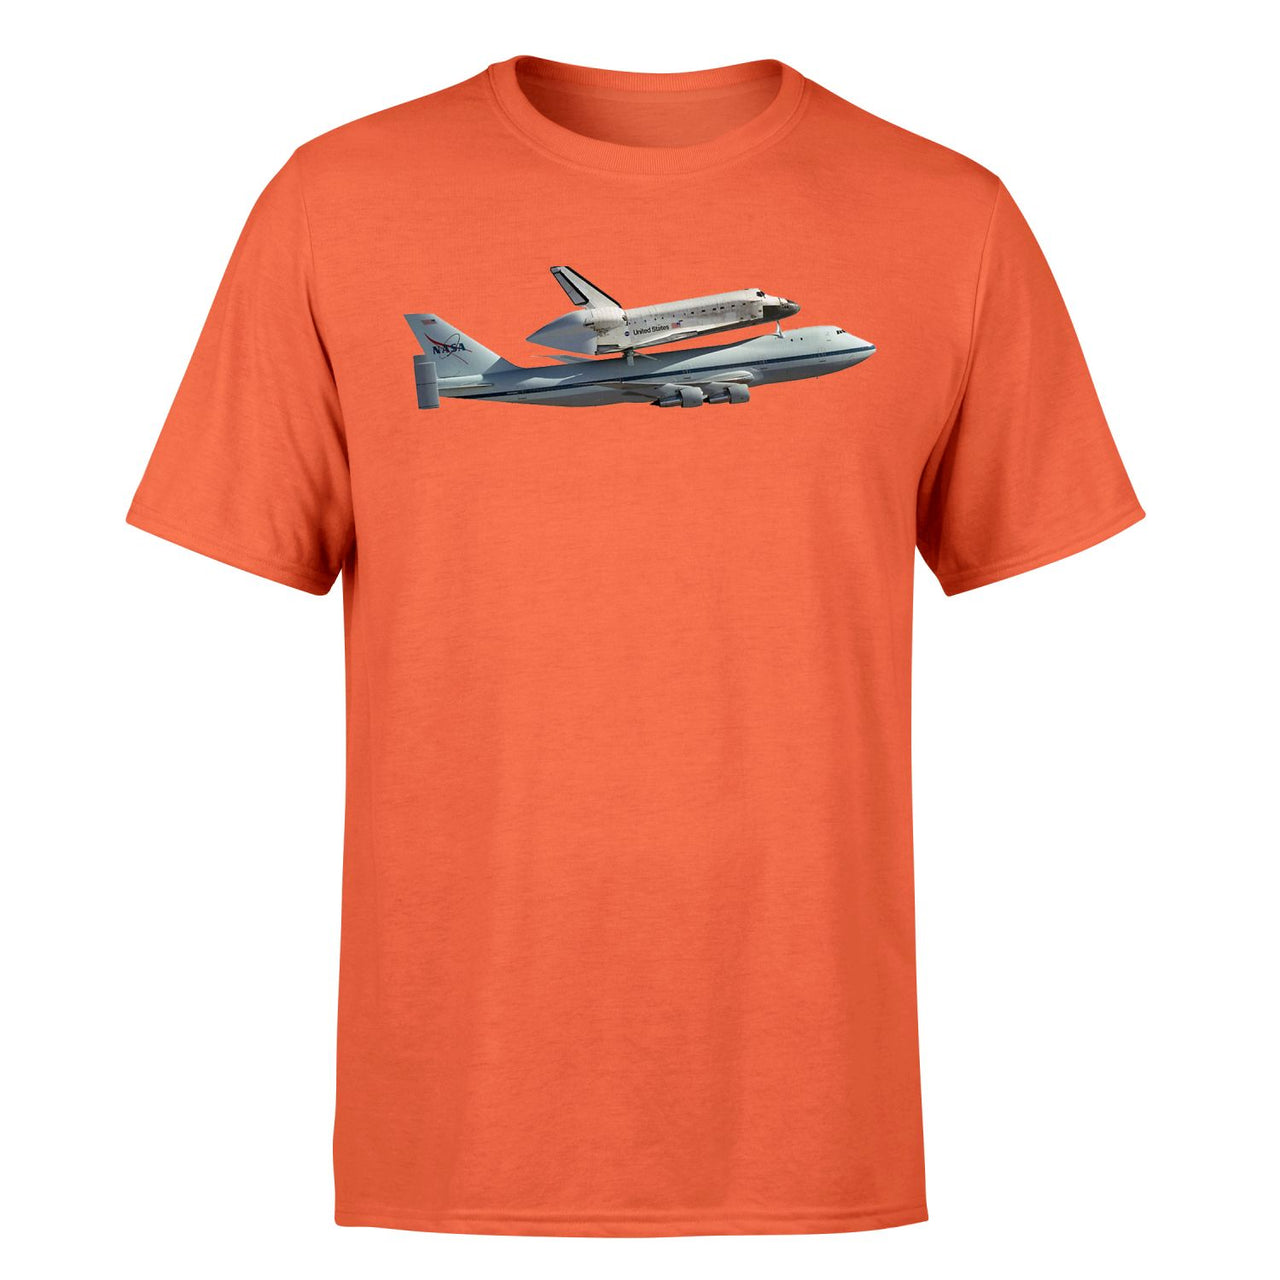 Space shuttle on 747 Designed T-Shirts